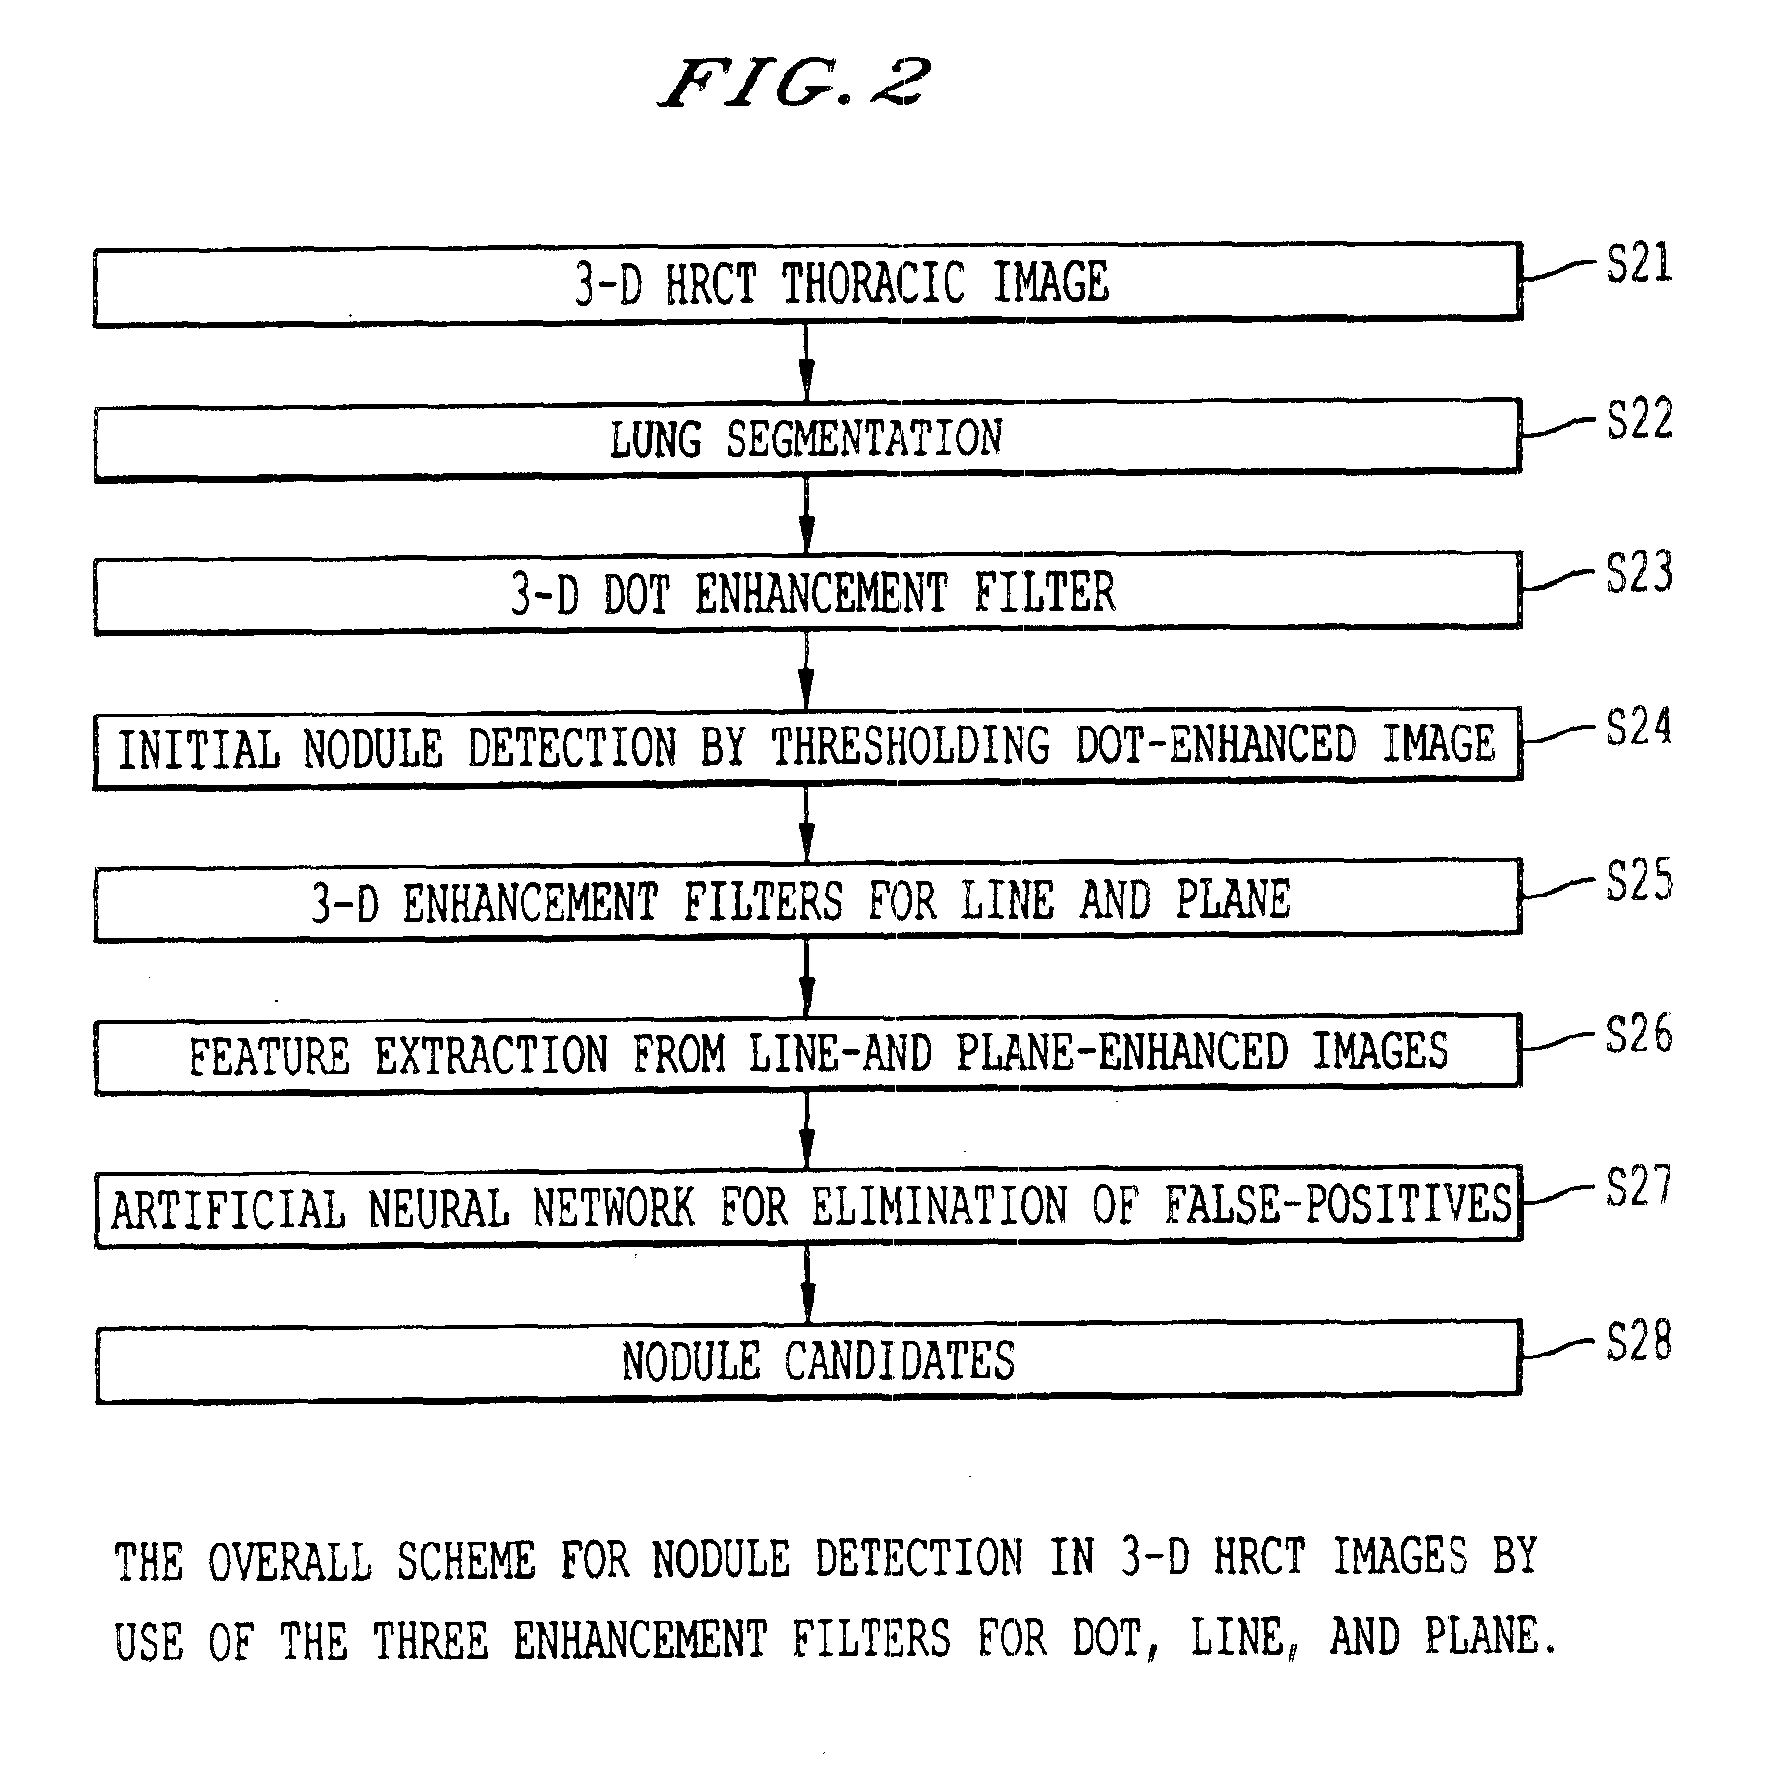 Method, system, and computer program product for computer-aided detection of nodules with three dimensional shape enhancement filters